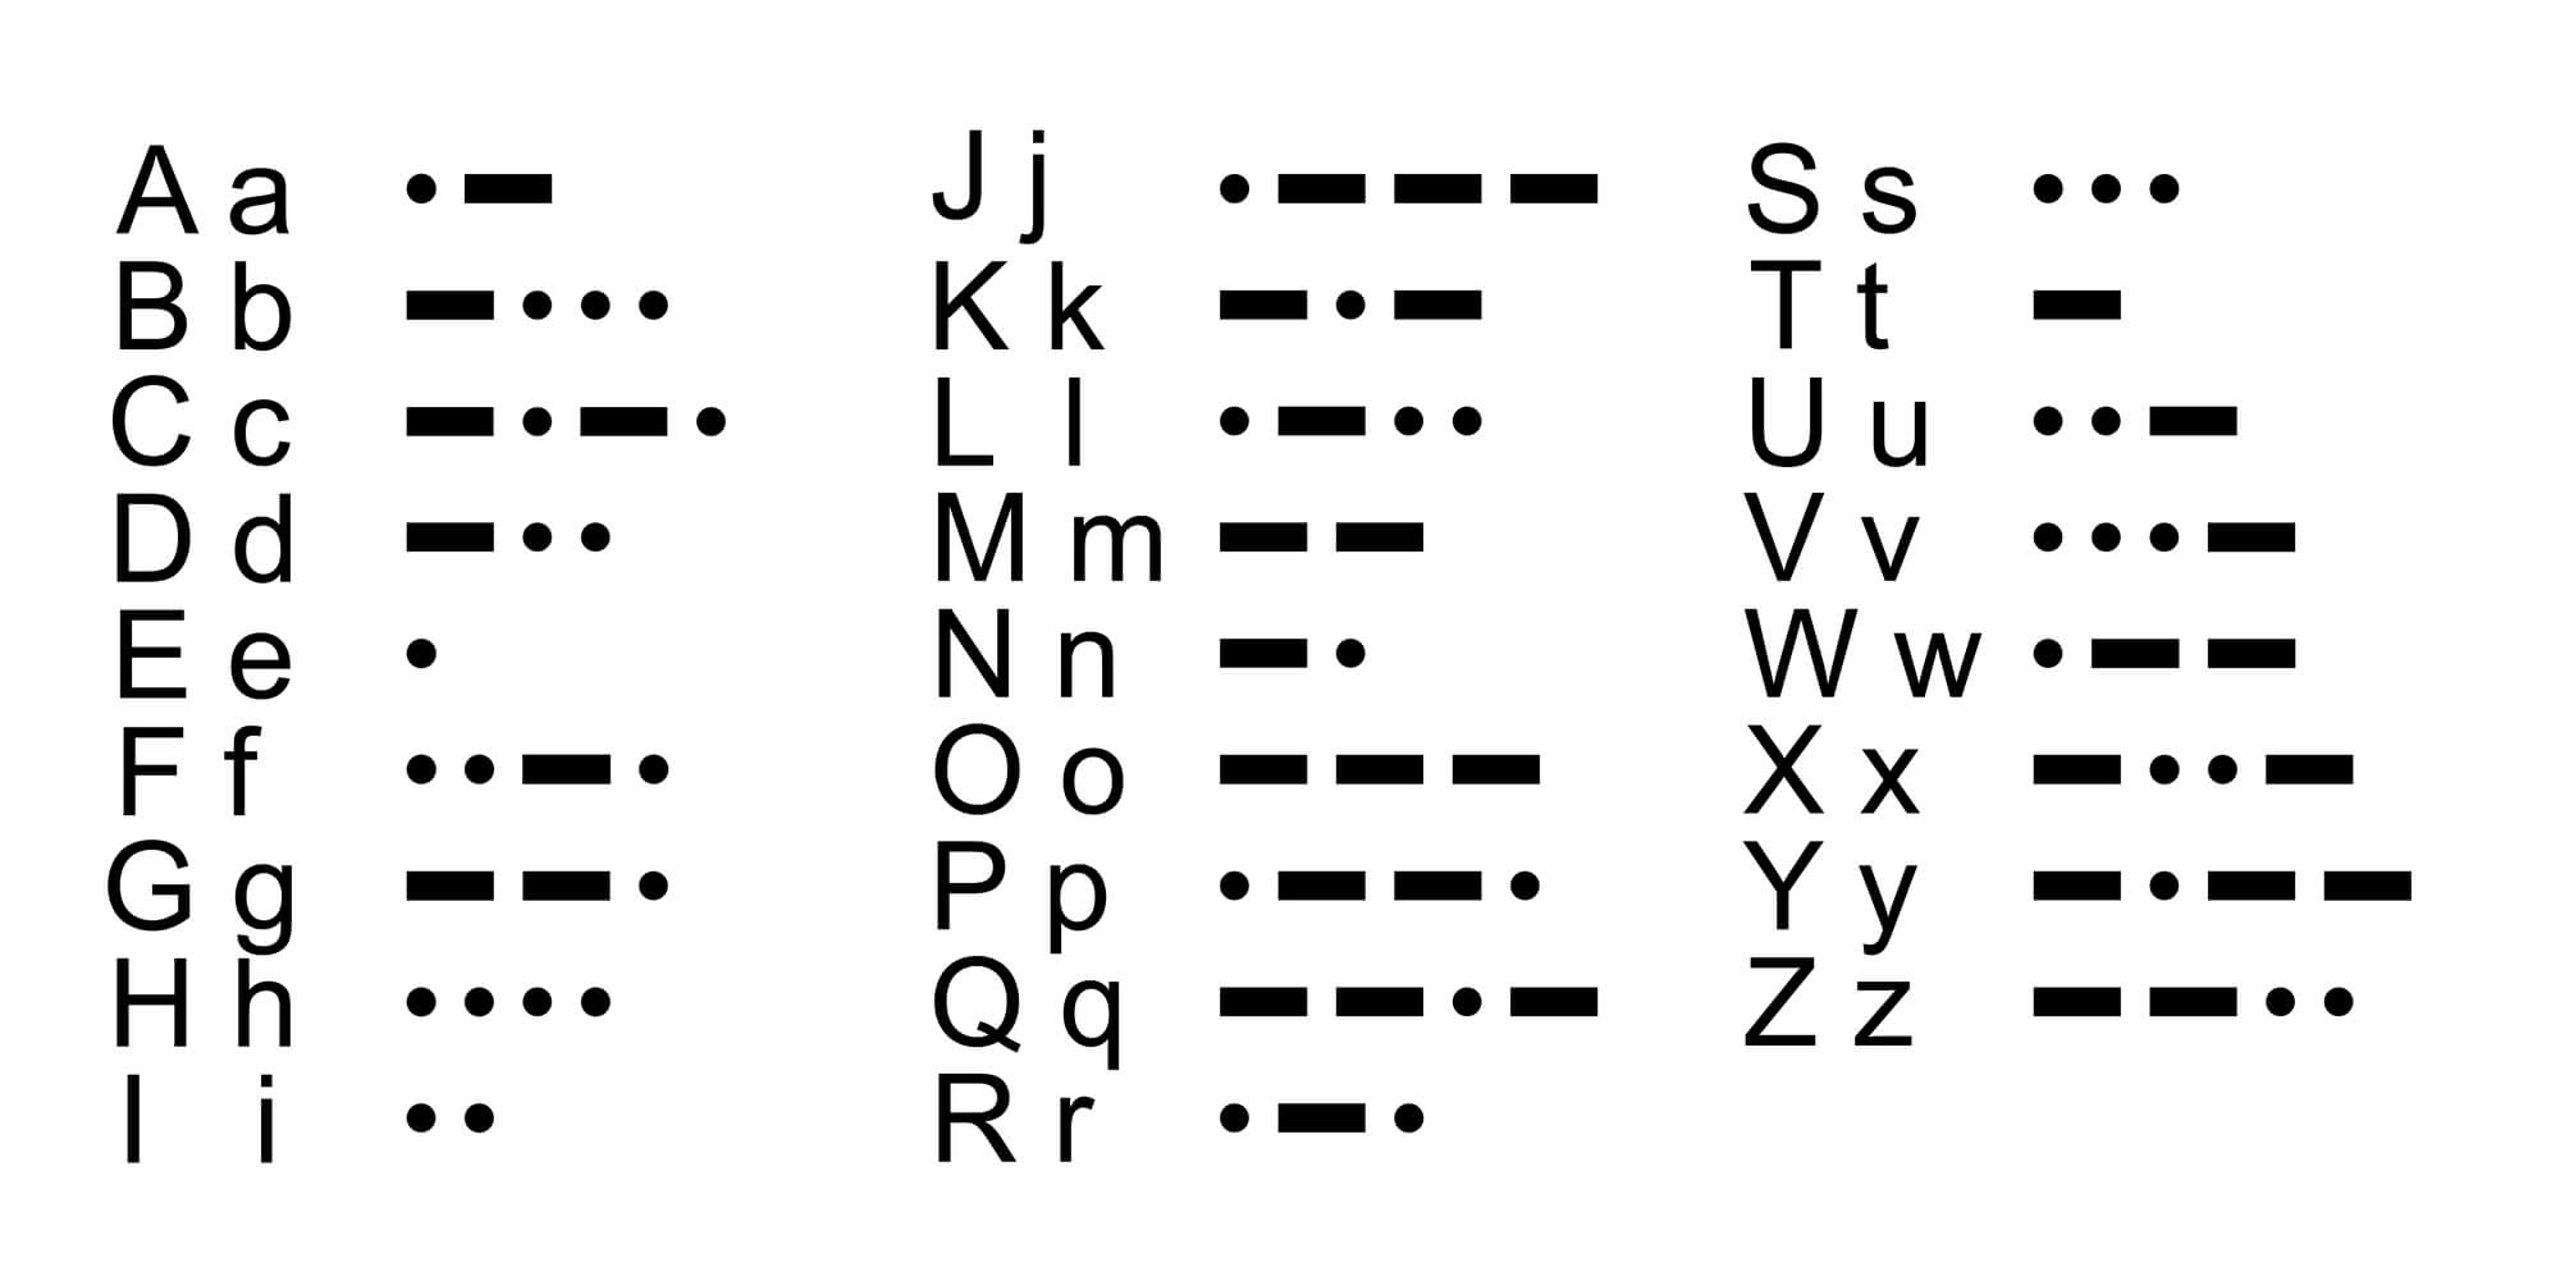 Morse Code: A guide on How to Read it - Bored Art